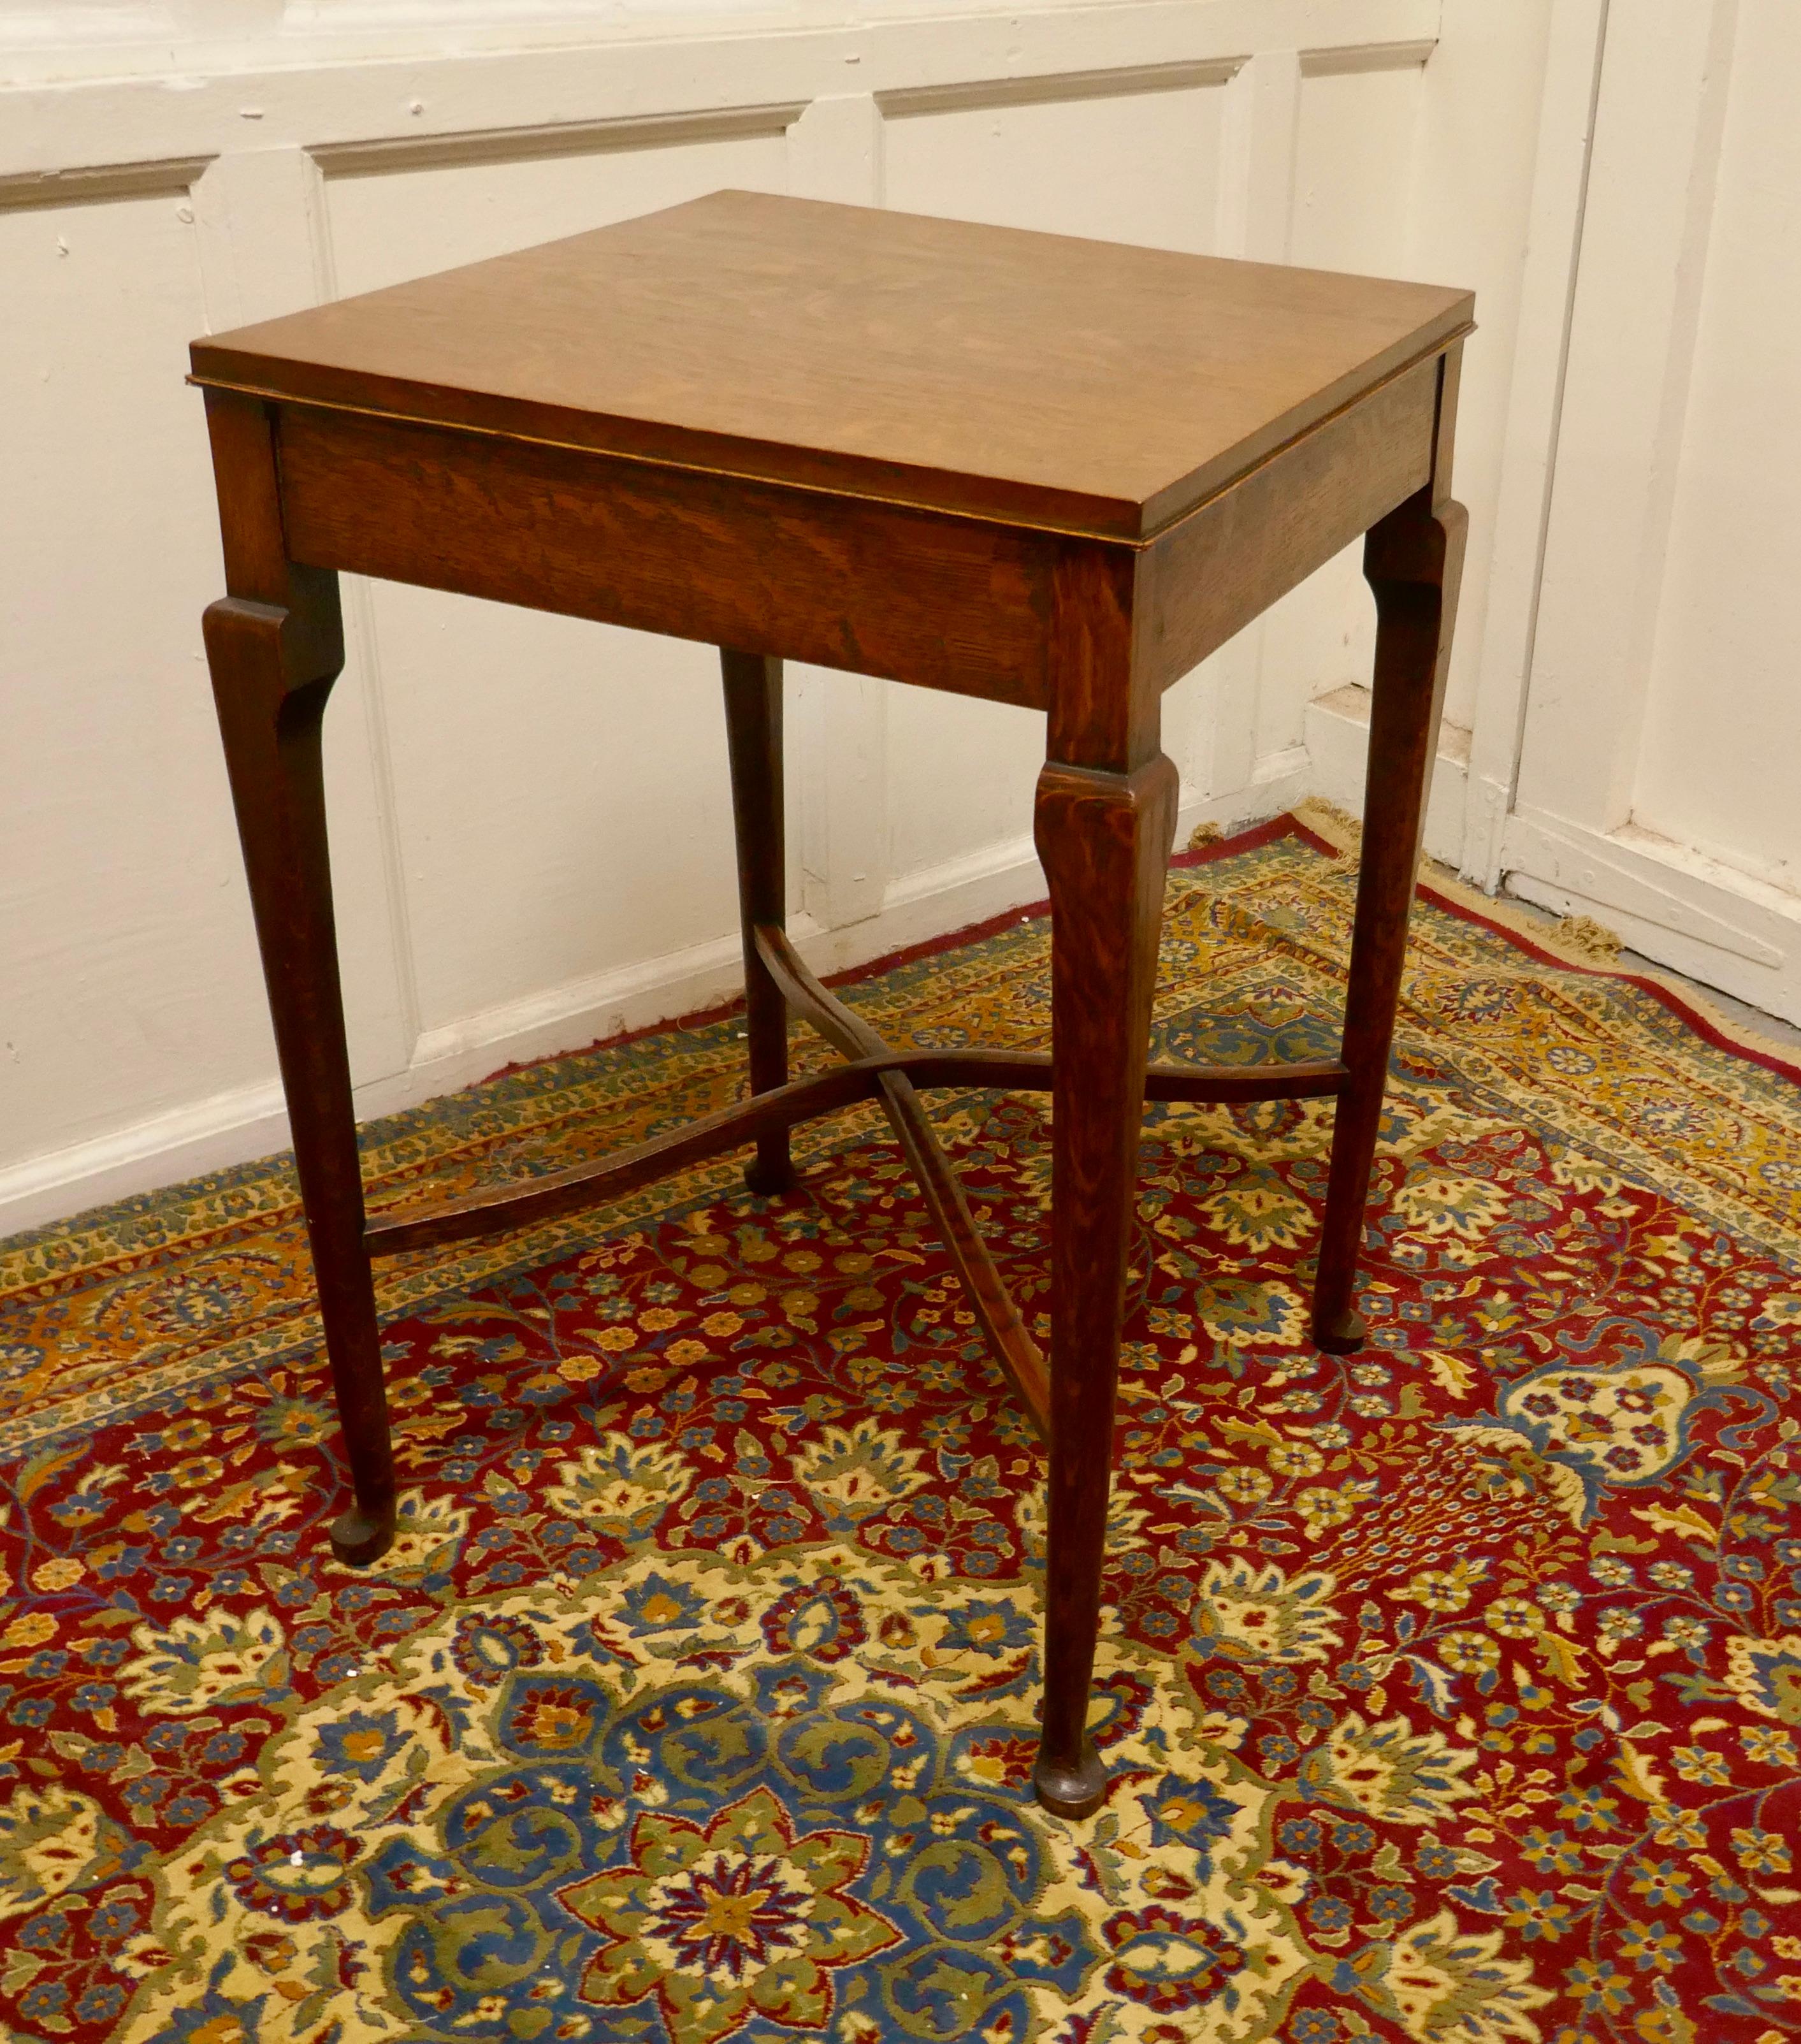 Arts & Crafts golden oak table.

A Lovely stylish table, the table legs are in a tapering pad foot style, these are joined with a sculptured X stretcher
The table is in good condition, there is a small chip on one corner.
It is 18” long, 18”